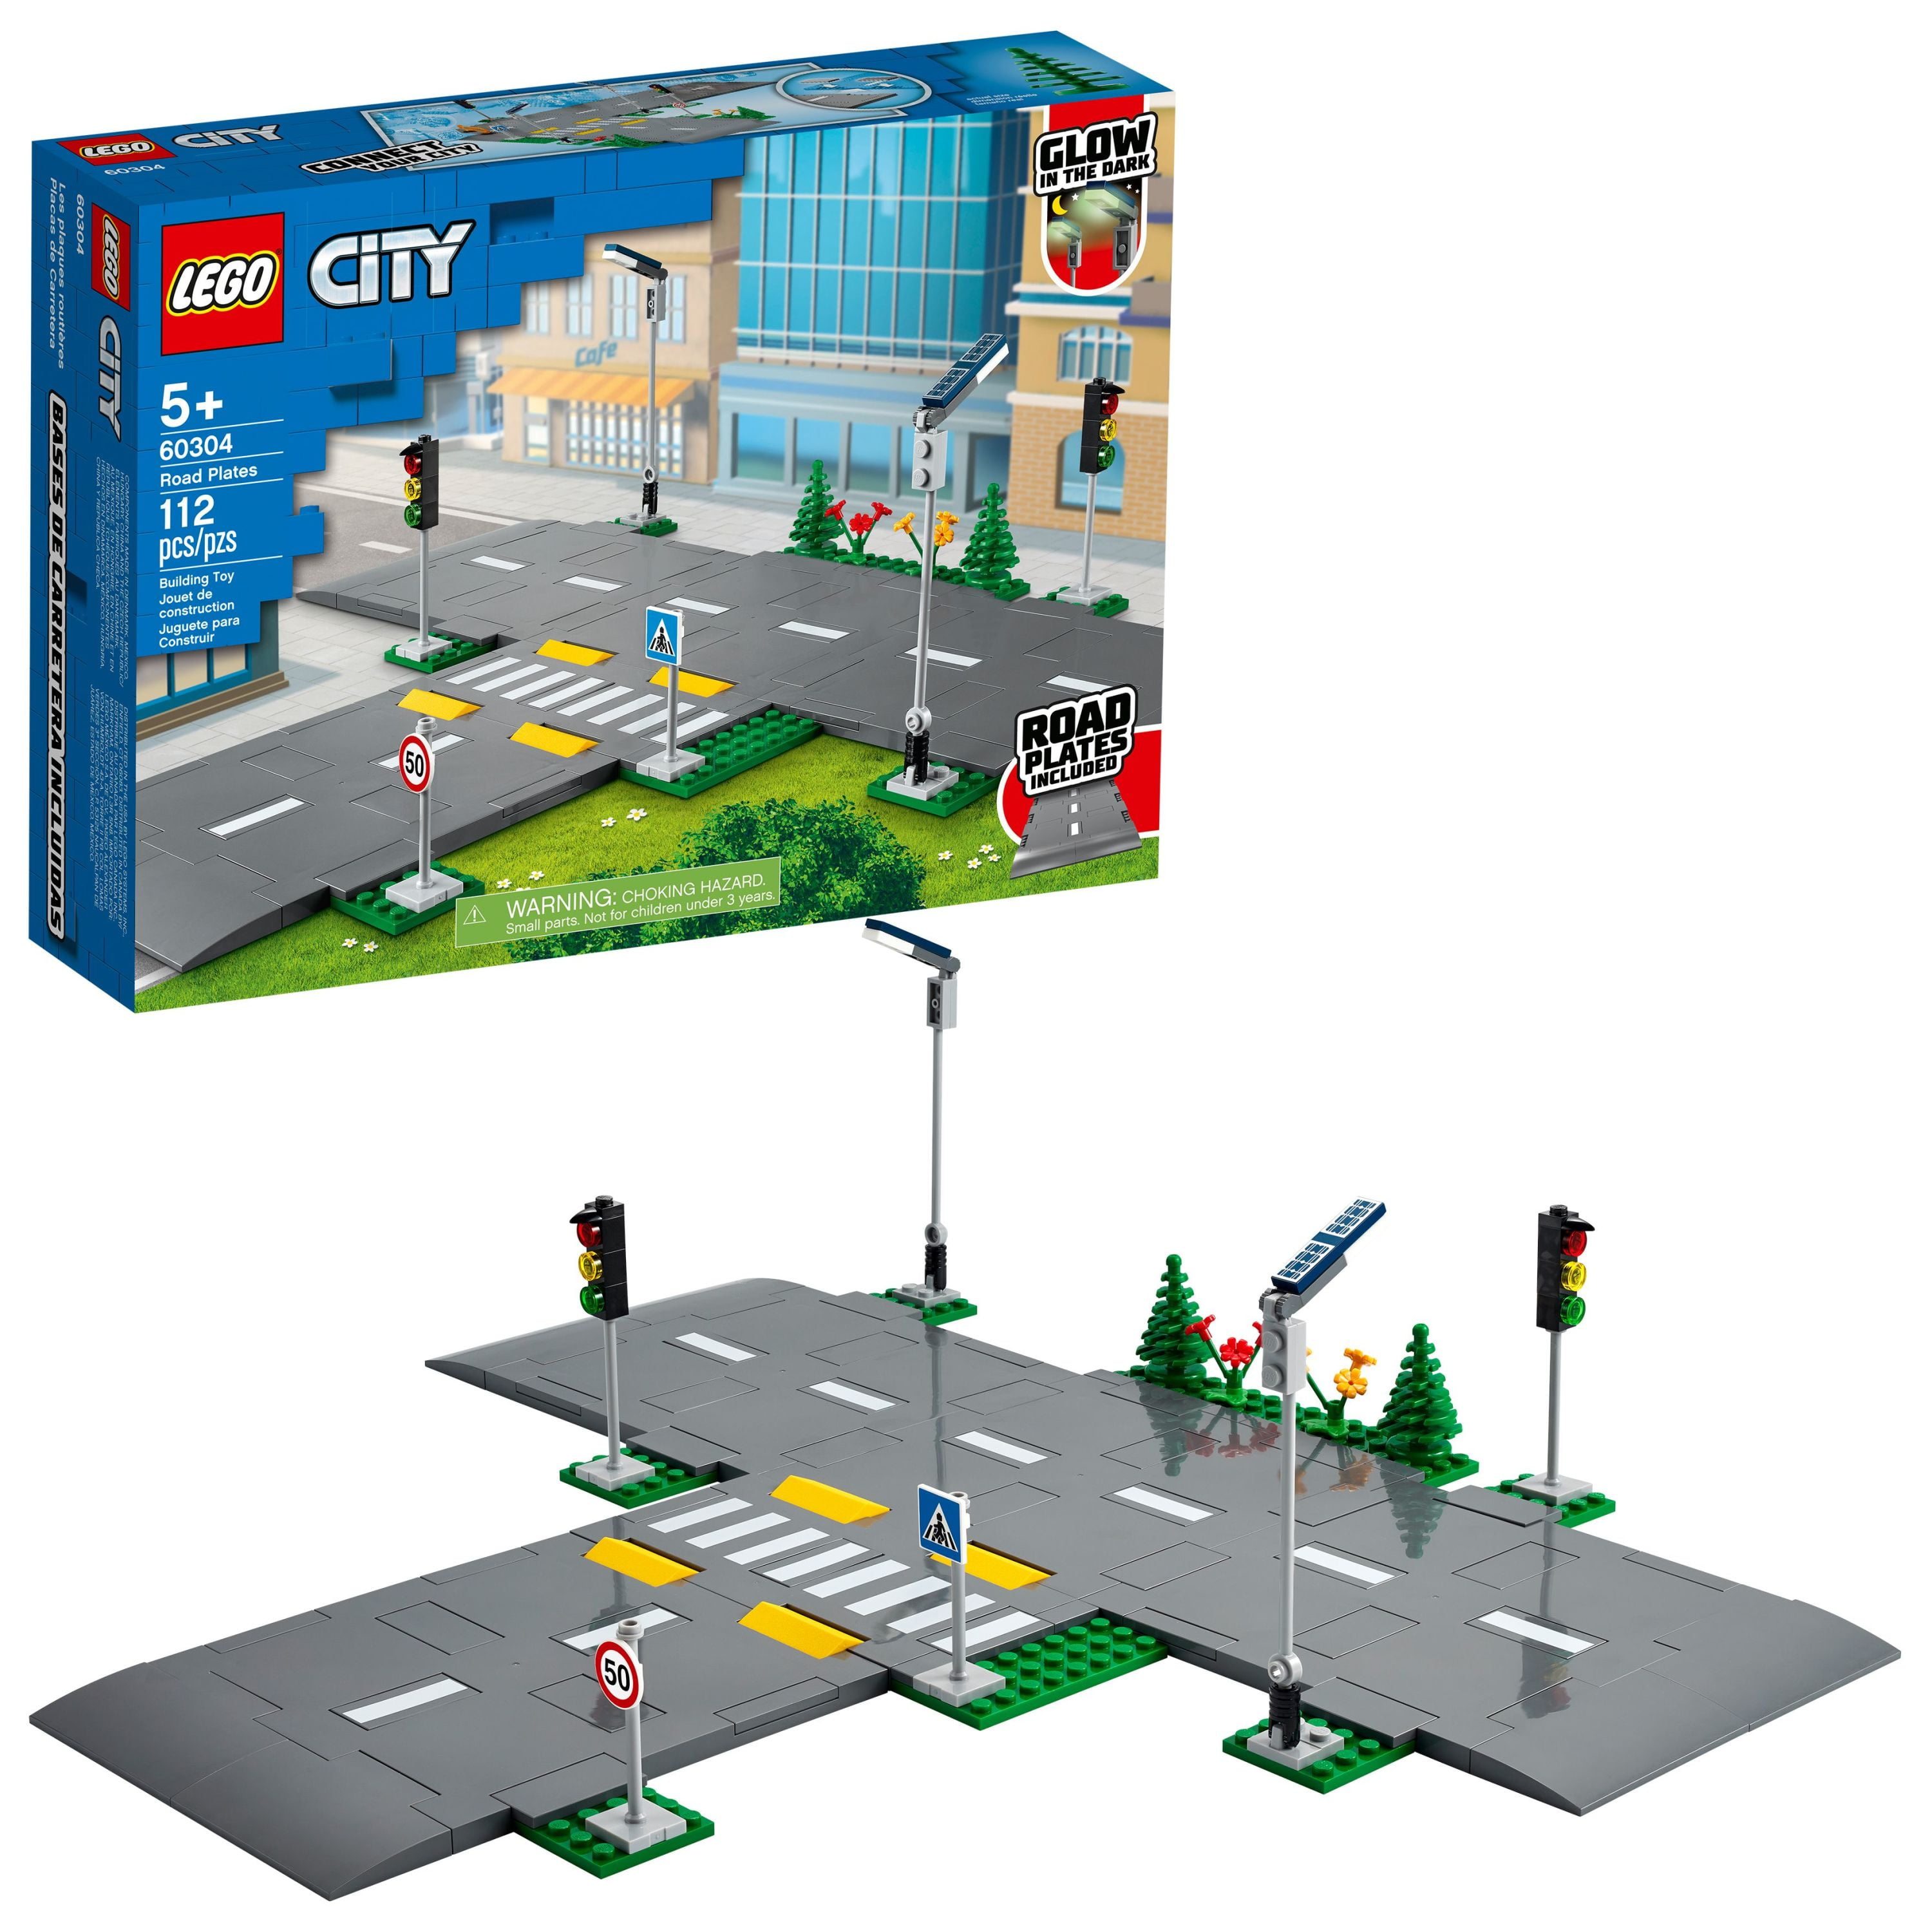 LEGO Road Plates Building Set, 60304 with Traffic Lights, Trees & Glow in the Dark Bricks, Gifts for 5 Plus Year Old Kids, Boys & Girls - Walmart.com